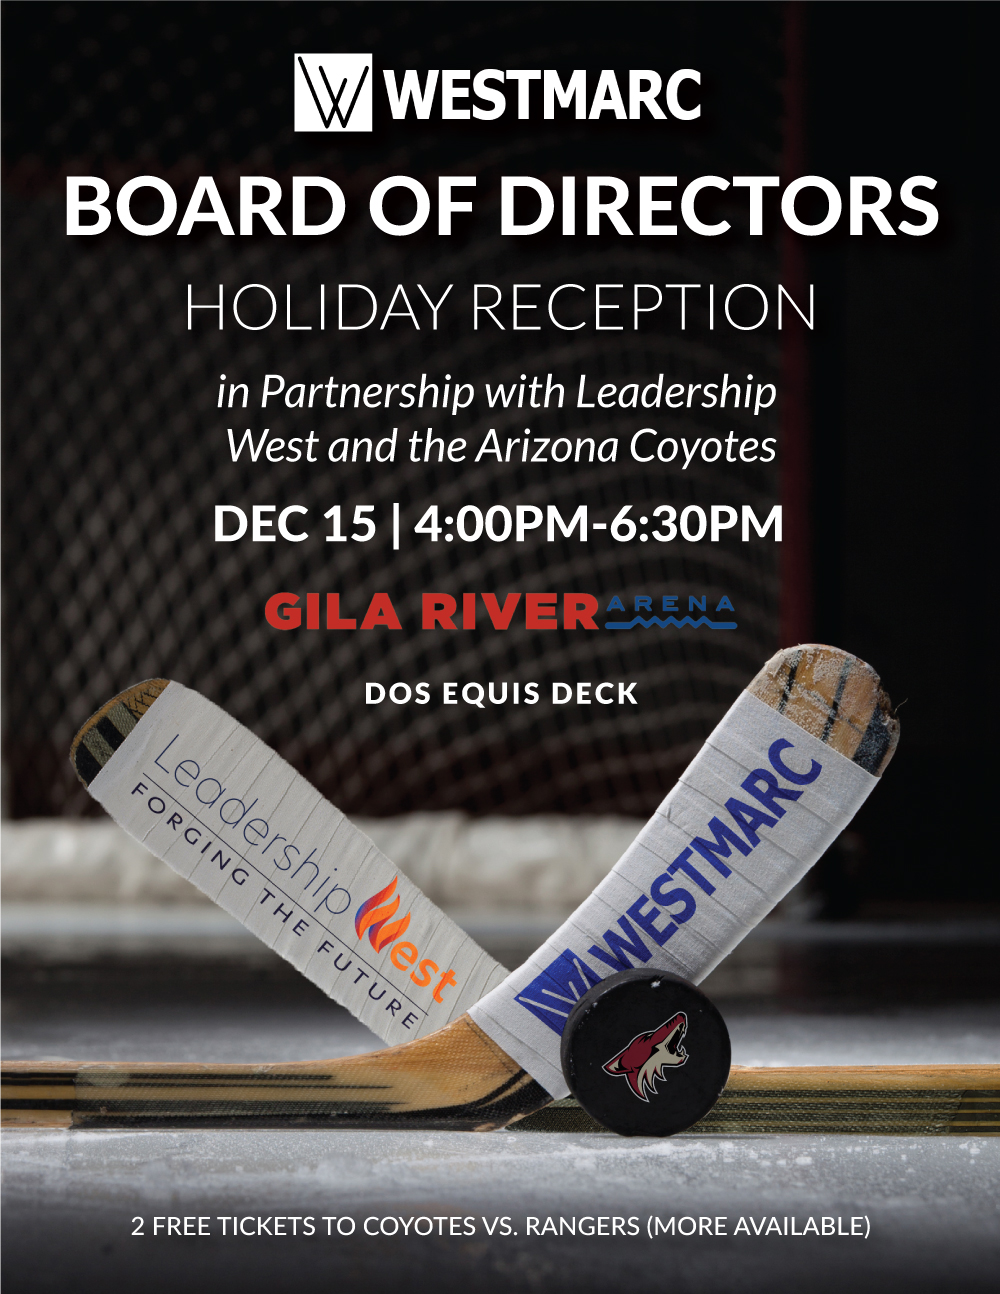 bod-HOLIDAY-RECEPTION-updated